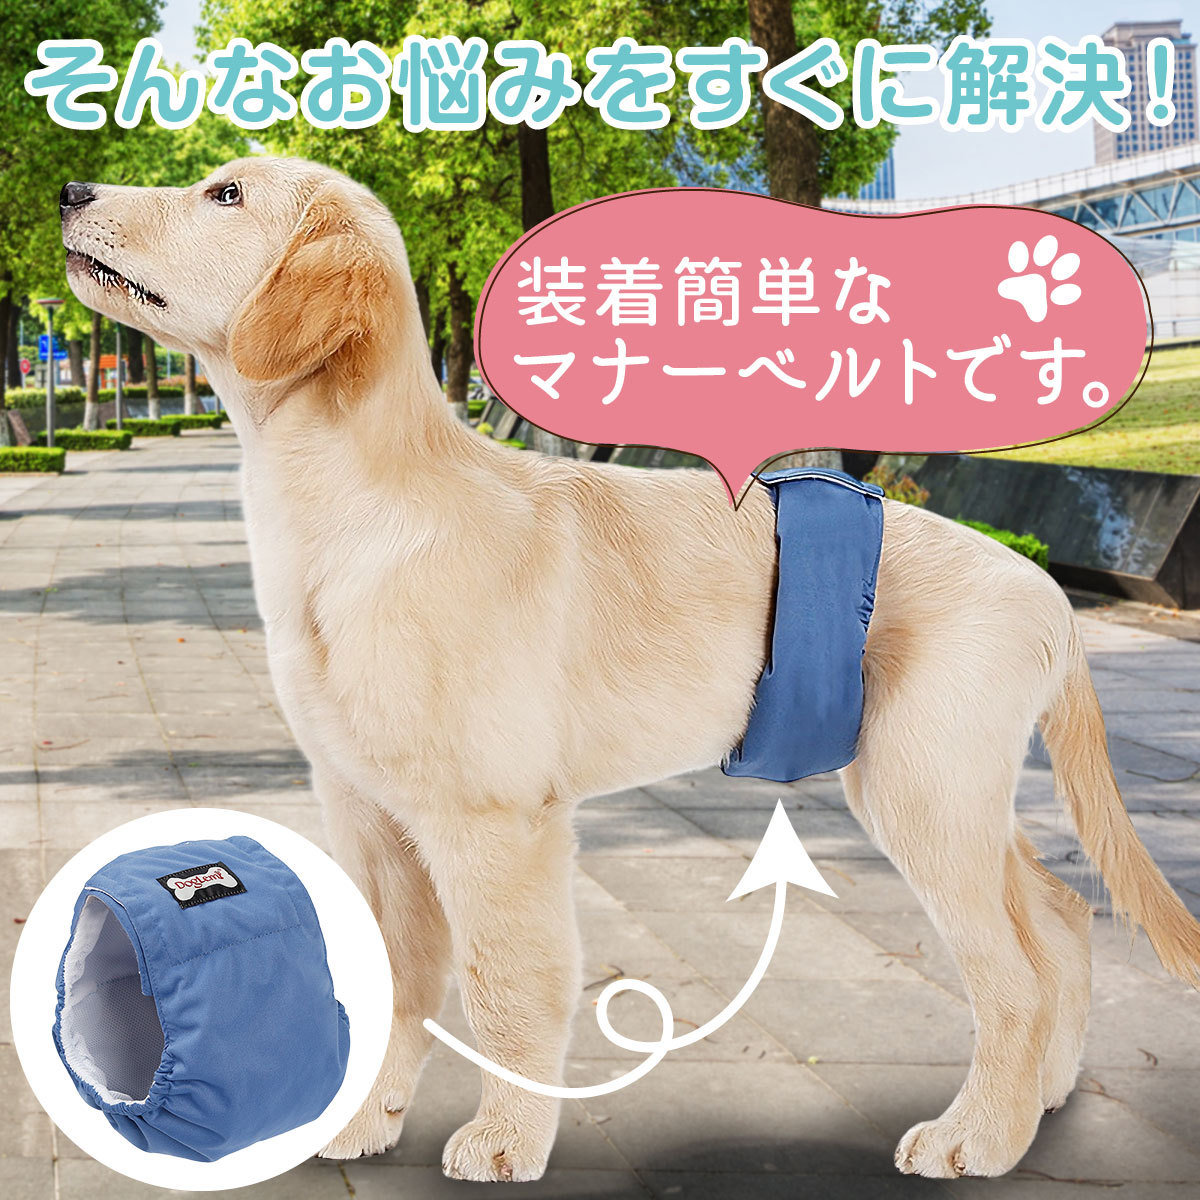  manner belt dog male manner wear diapers man gap not mesh stylish Homme tsu pants pad band wide small size medium sized large XS S M L XL XXL